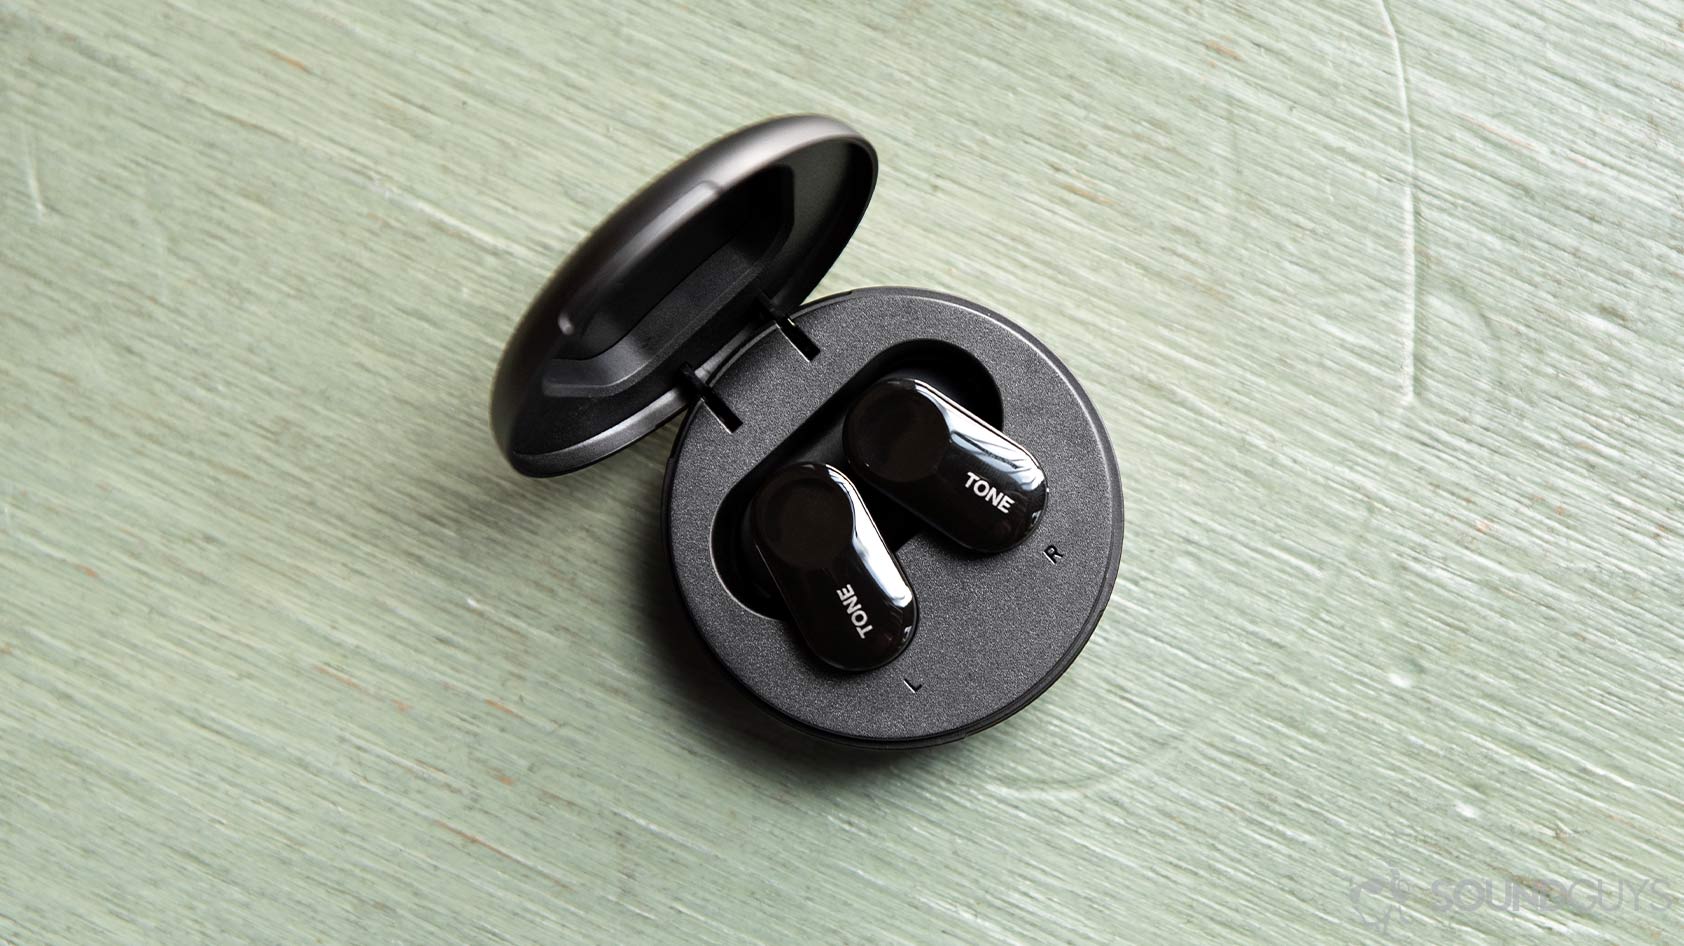 An aerial photo of the LG Tone Free HBS FL7 true wireless earbuds in the circular charging case on a green wood surface.